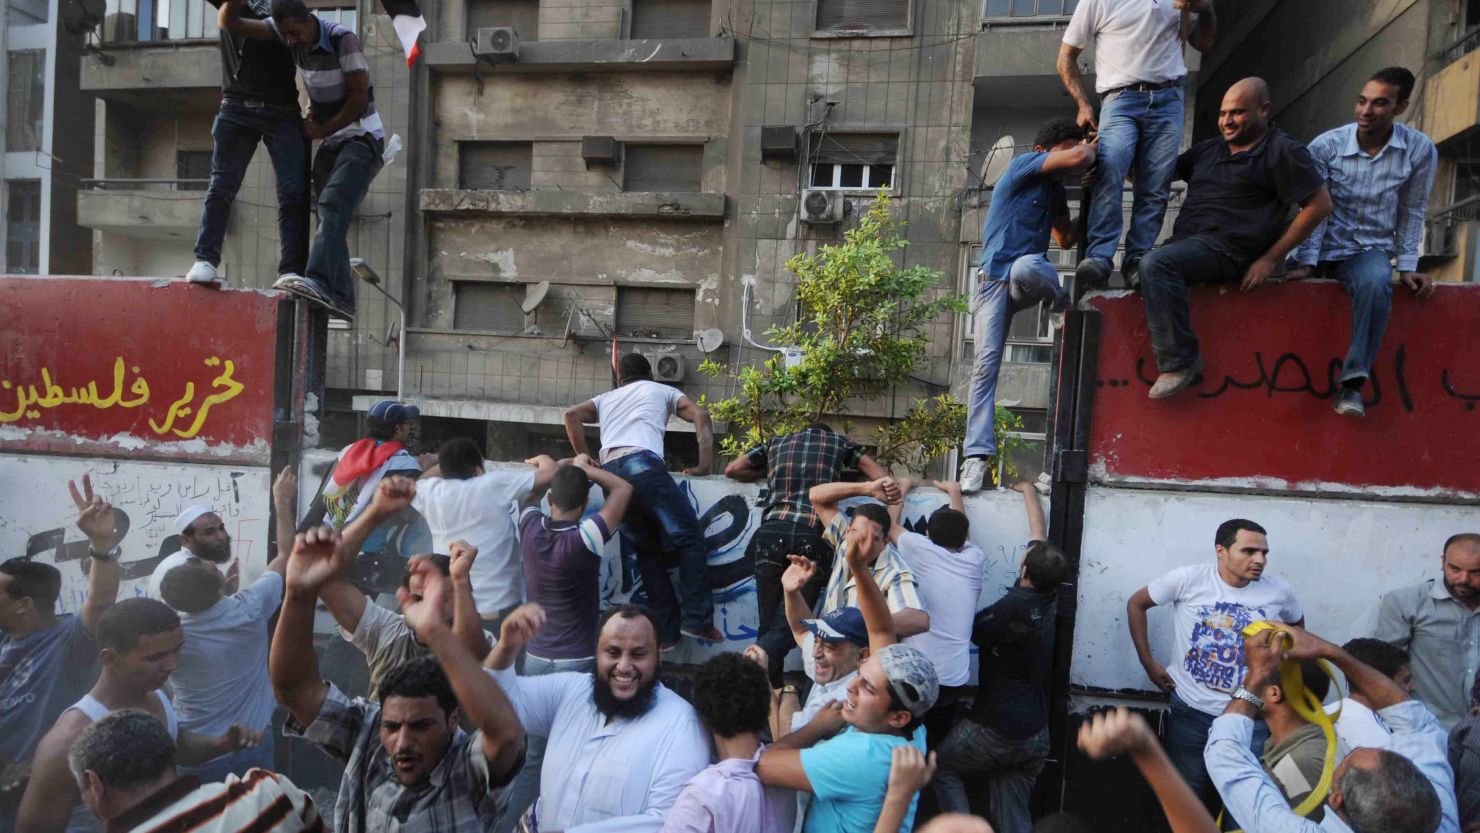 Egyptian protestors ransacked unsecured parts of the Israeli embassy offices in Cairo on September 9.